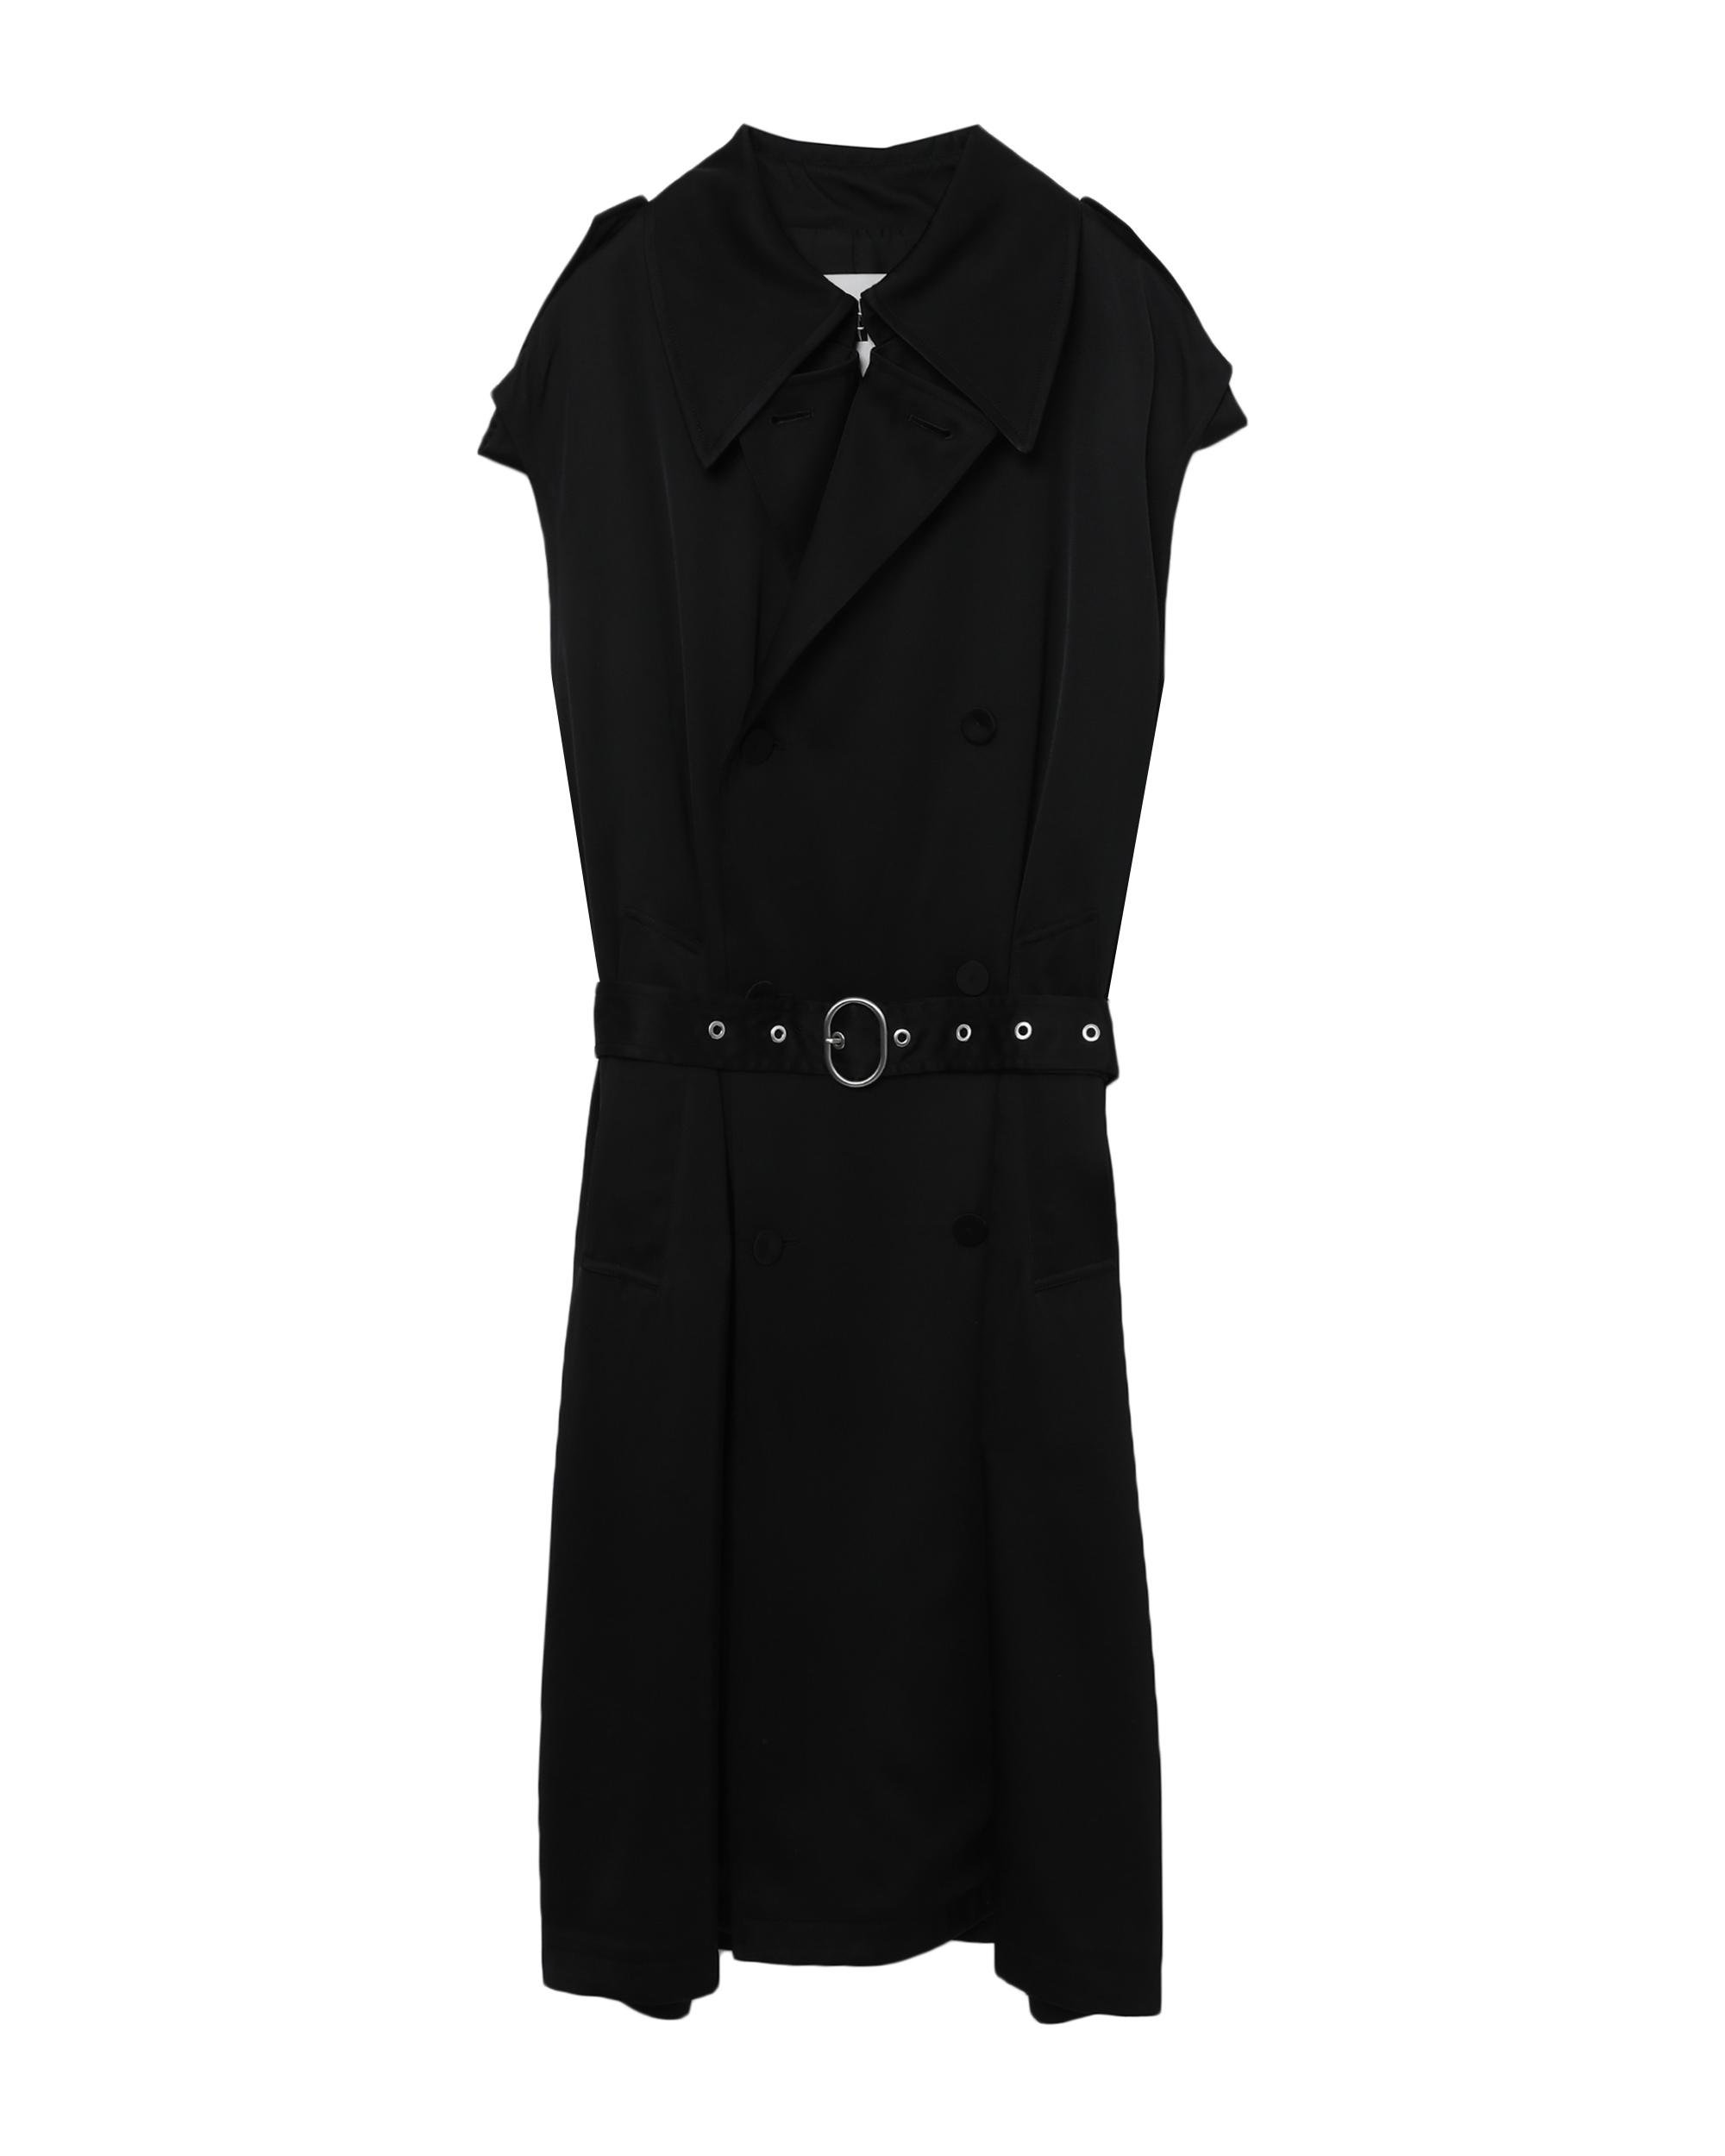 Belted trench coat by JIL SANDER